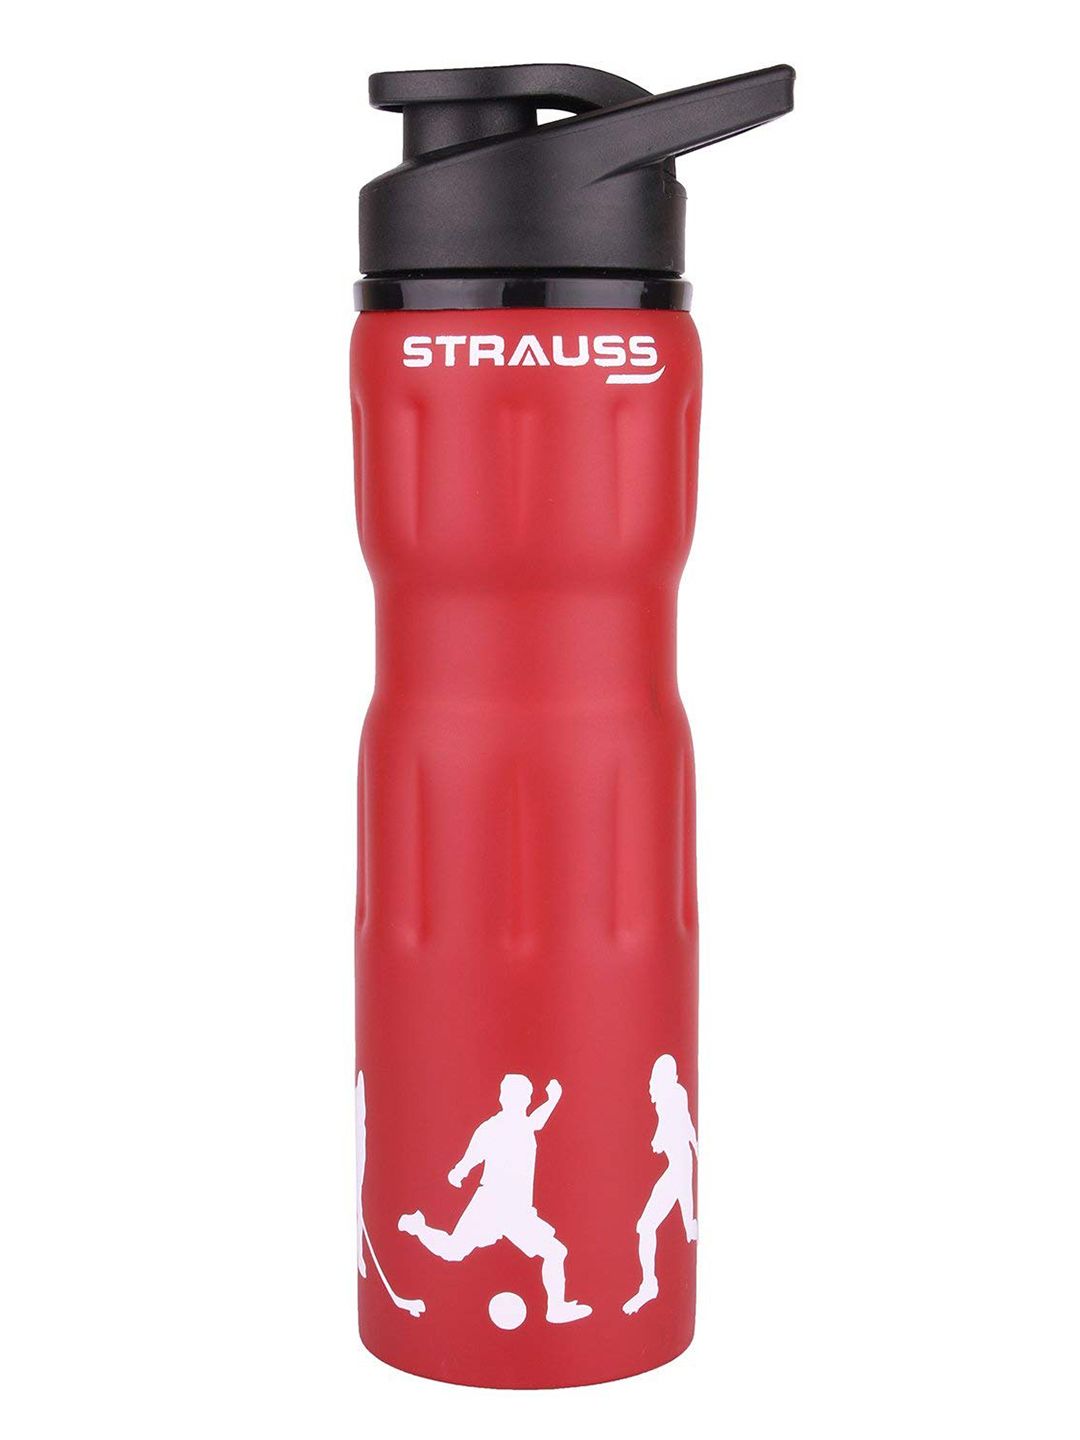 STRAUSS Red & White Stainless-Steel Water Bottle, 750 ml (Red) Price in India